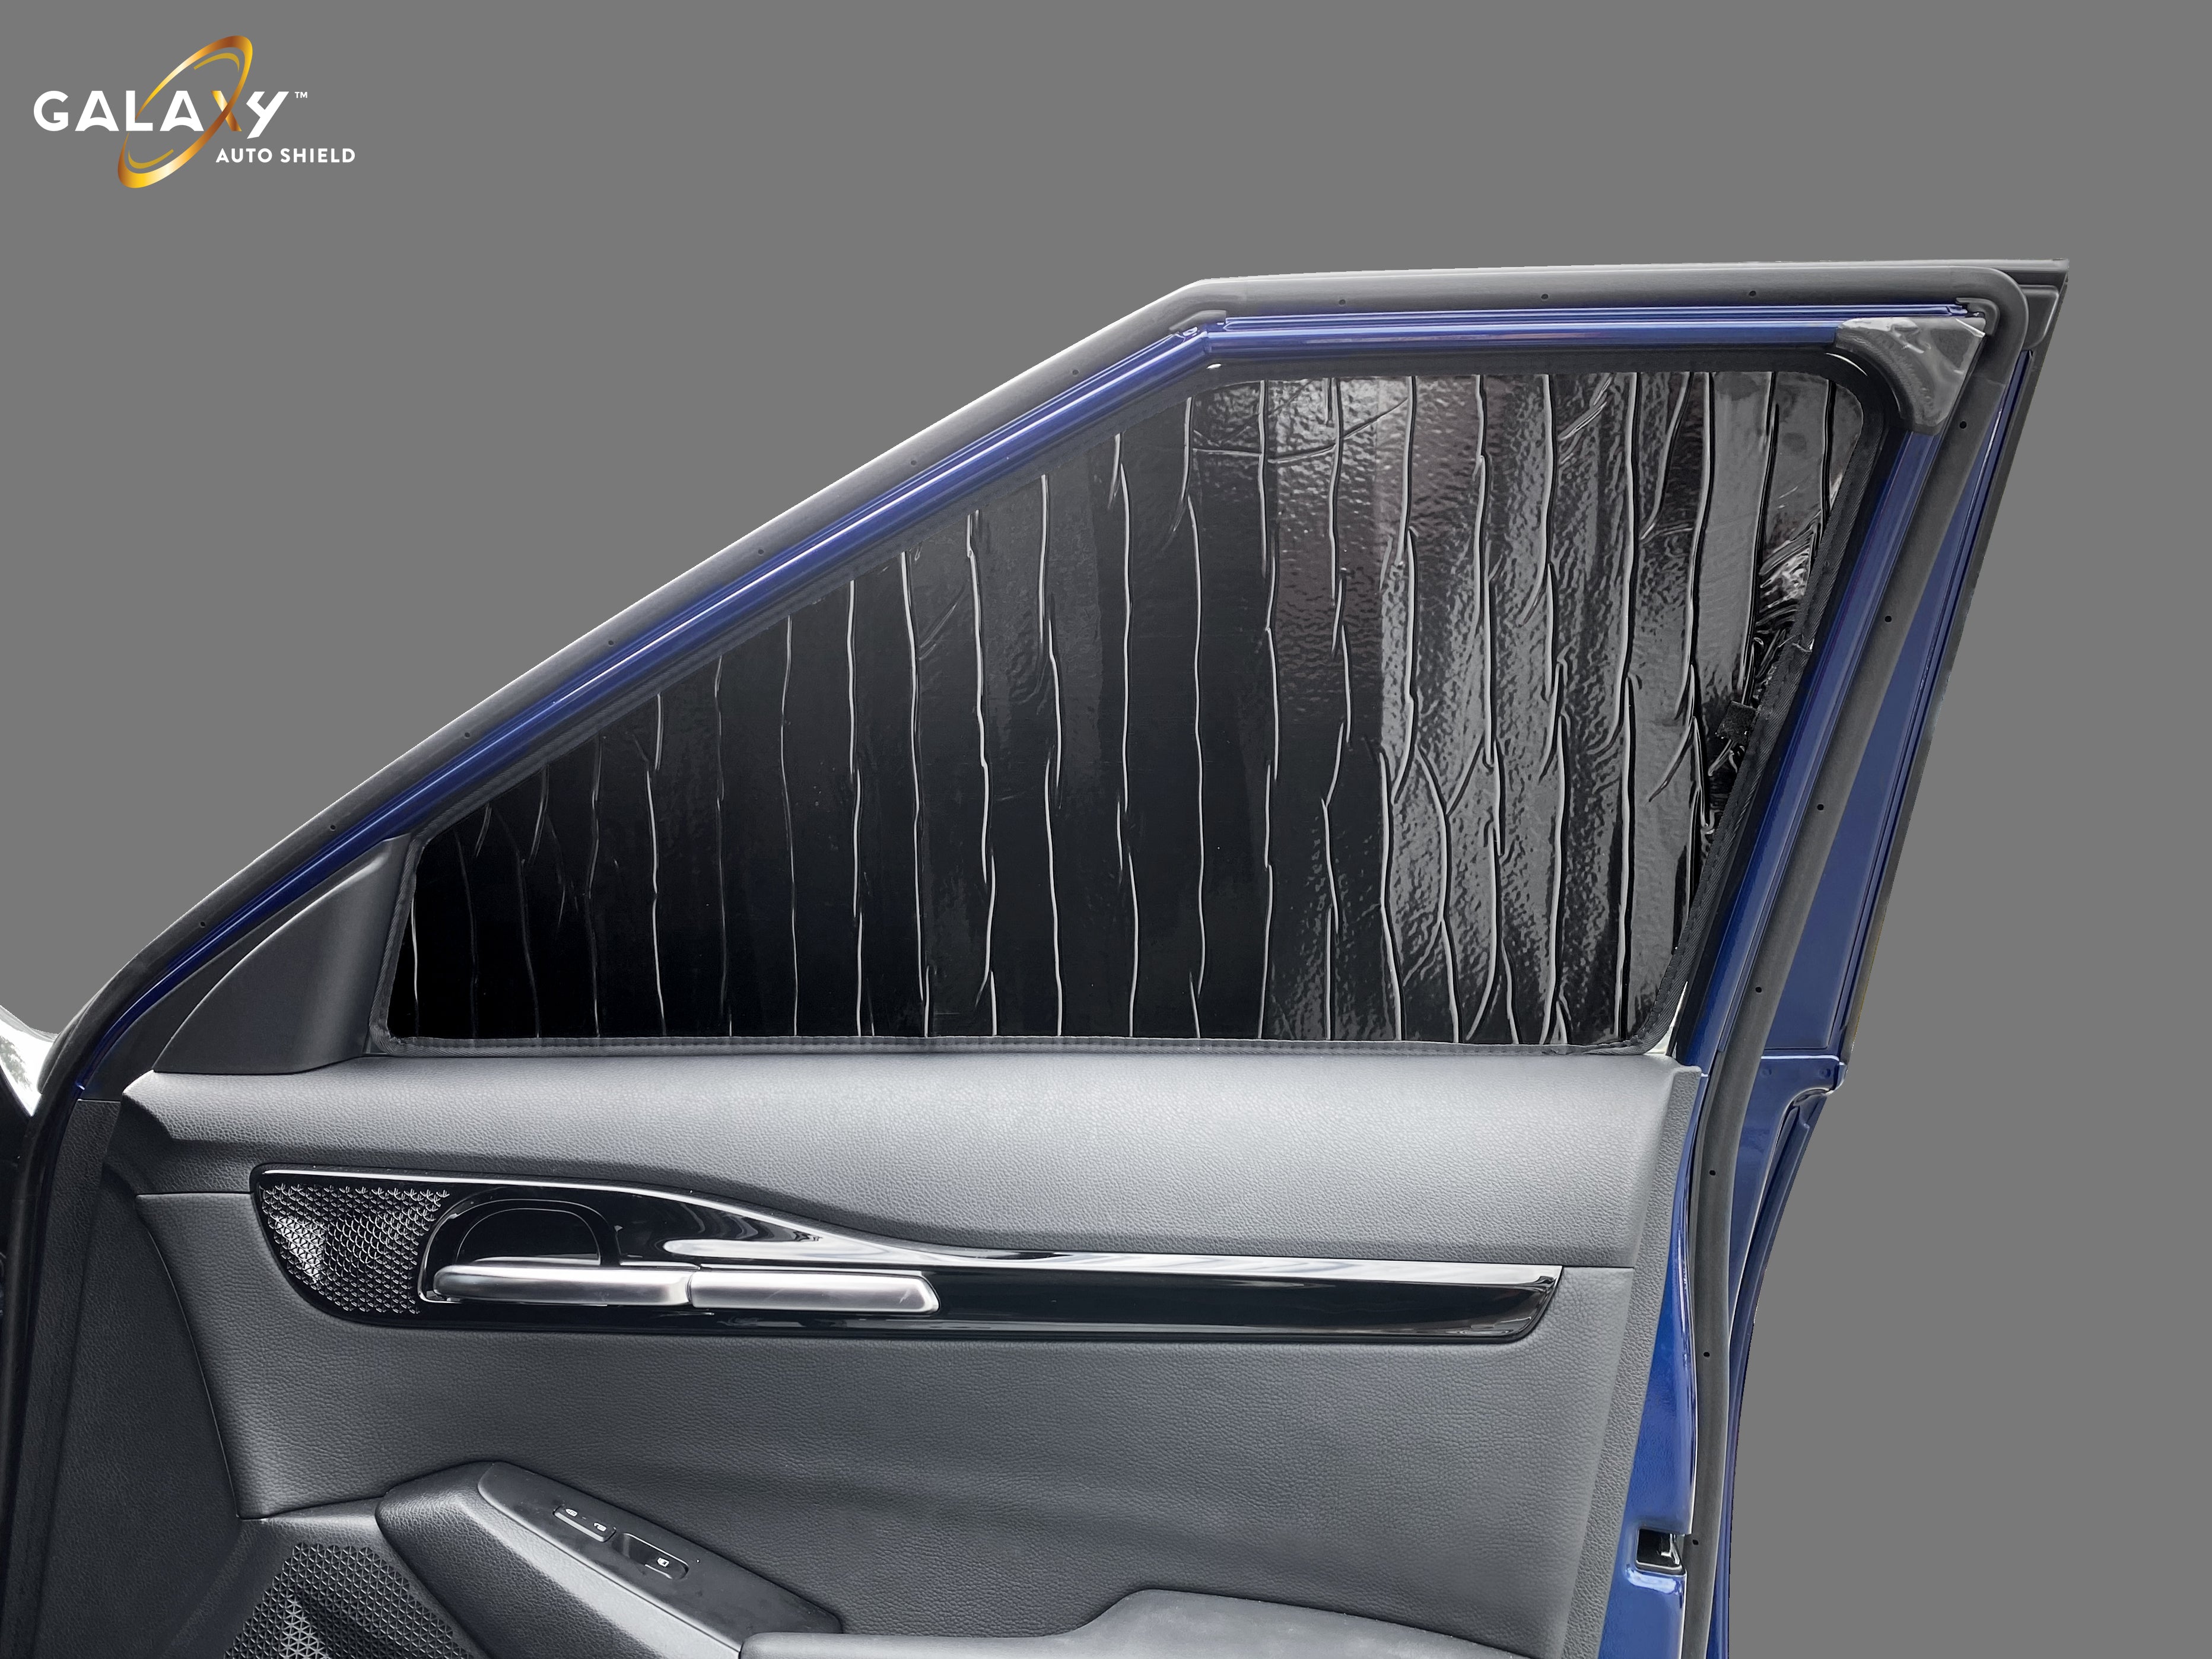 Sunshades for 2021-2024 Kia Seltos SUV (View for more options)